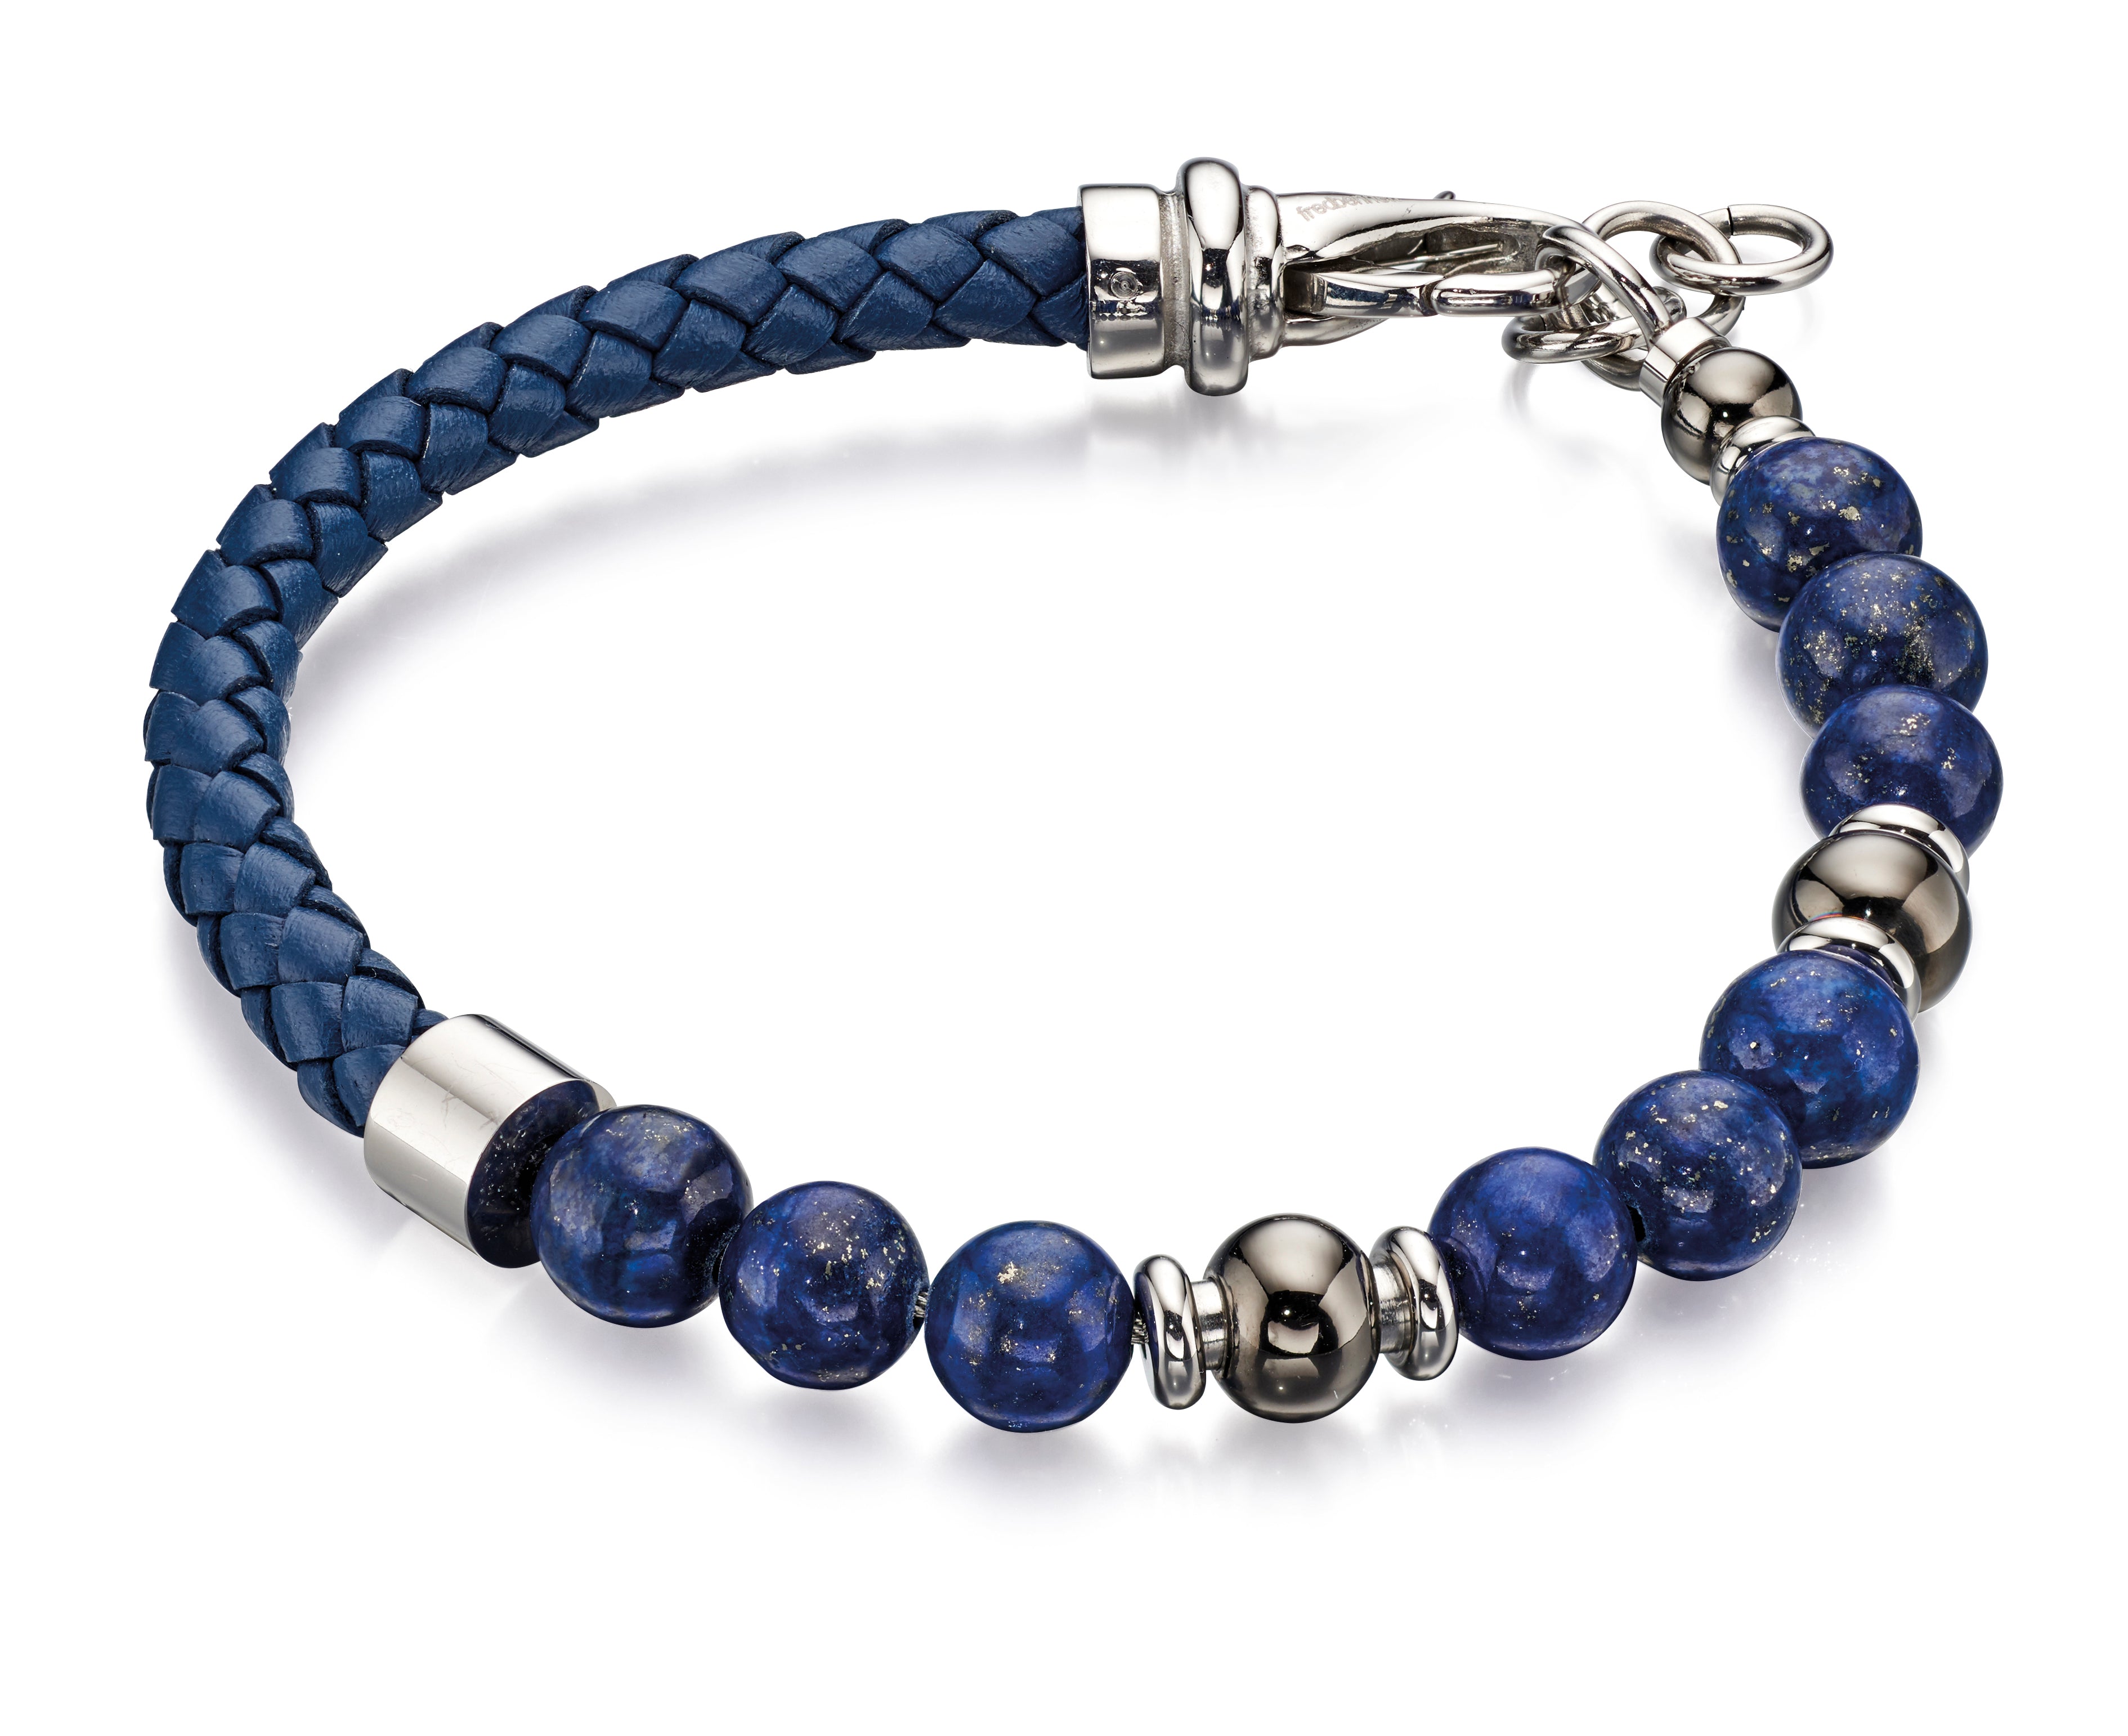 Stainless Steel & Blue Leather w/ Lapis Beads Bracelet - FB0003 - Hallmark Jewellers Formby & The Jewellers Bench Widnes